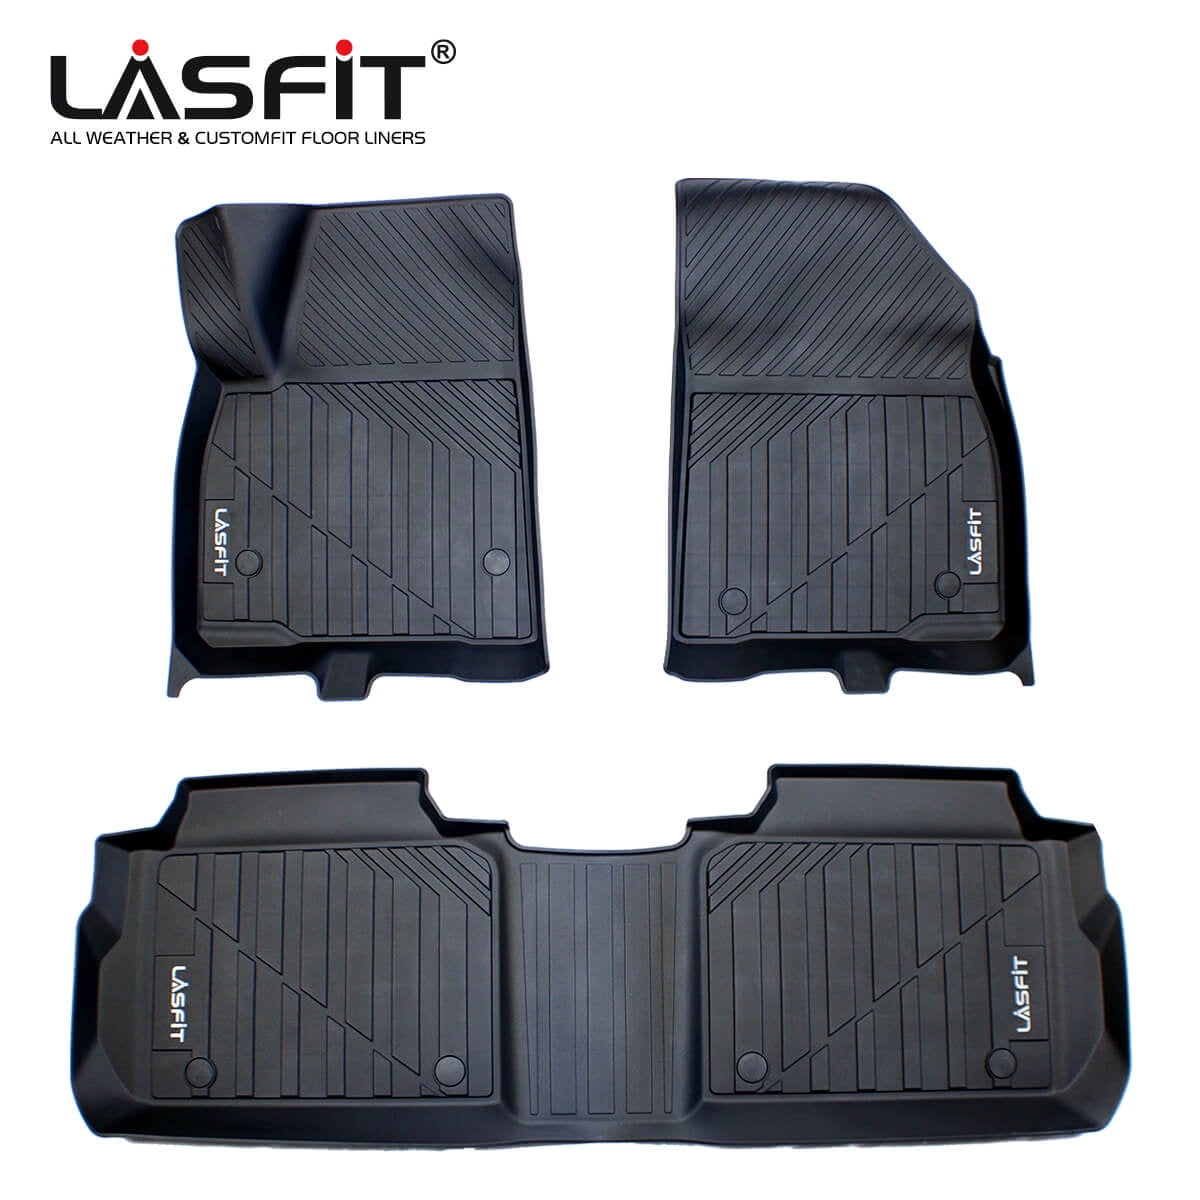 KUST All Weather Floor Mats for Cadillac XT5 2017-2021 Custom Fit Floor Liner 1st & 2nd Row Liners Non-Slip